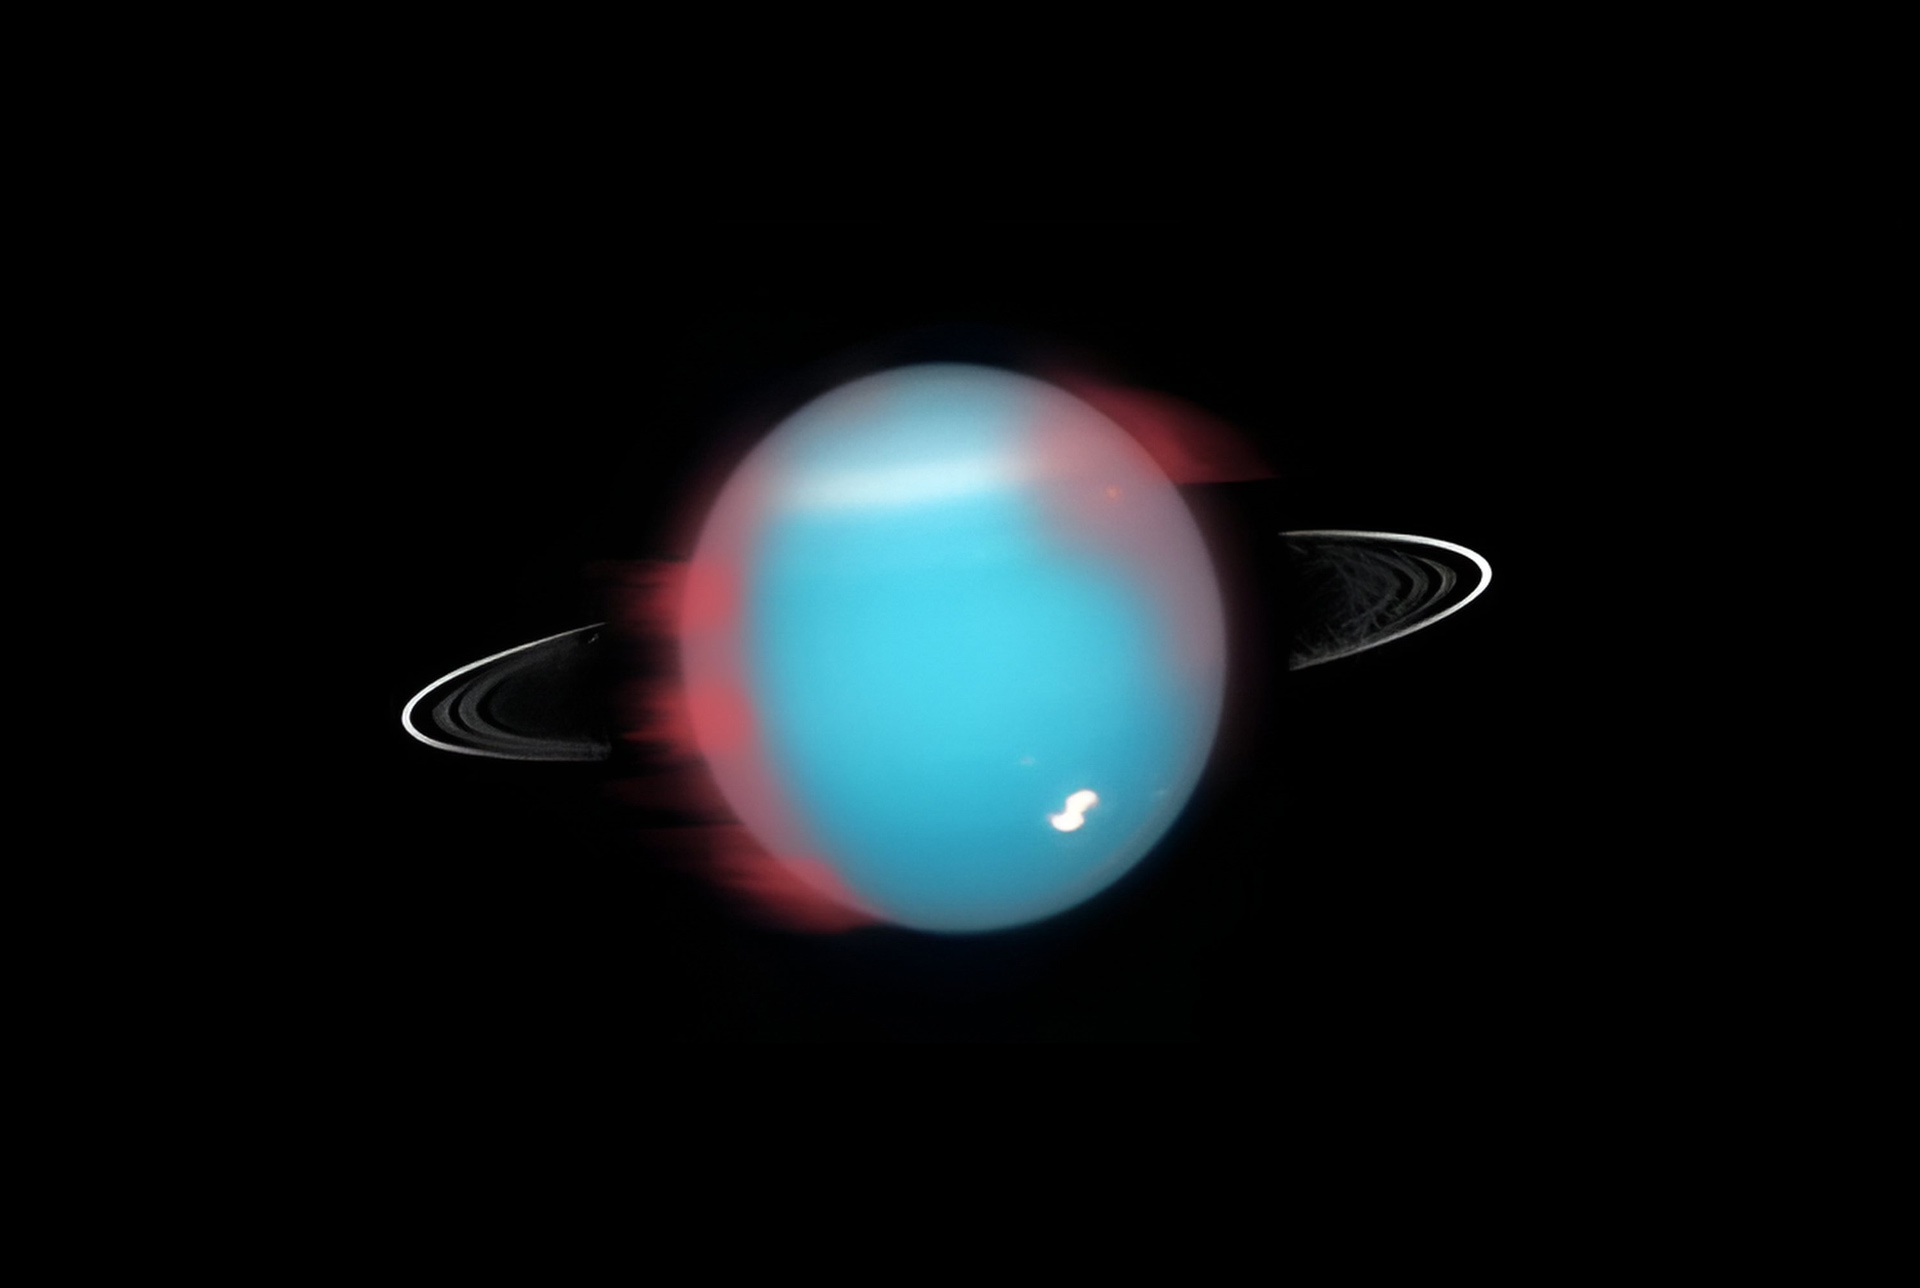 an artistic representation of how the northern infrared aurora would have looked like in 2006 (marked in red). the darker red locations indicate confirmed aurora locations, with fainter red used to mark possible aurora locations. Credit: NASA, ESA and M. Showalter (SETI Institute) for the background image of Uranus, as was observed by the Hubble Space Telescope (in the visible spectrum) in August 2005.